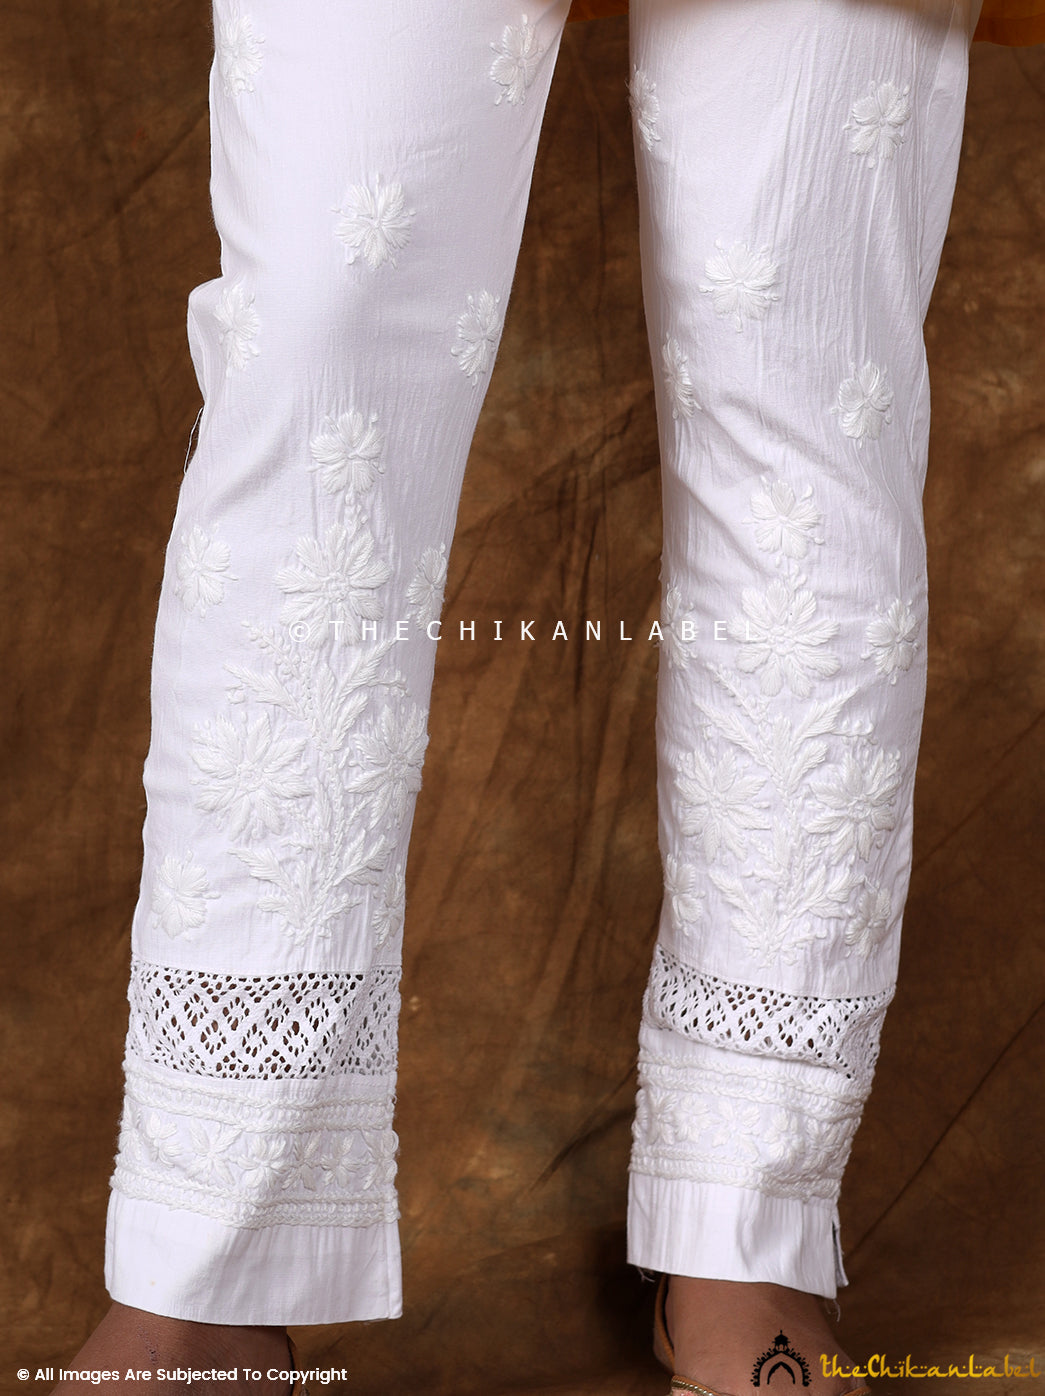 Ladies Off White Cigarette Pant at Rs 235/piece in Mumbai | ID:  2850046020112